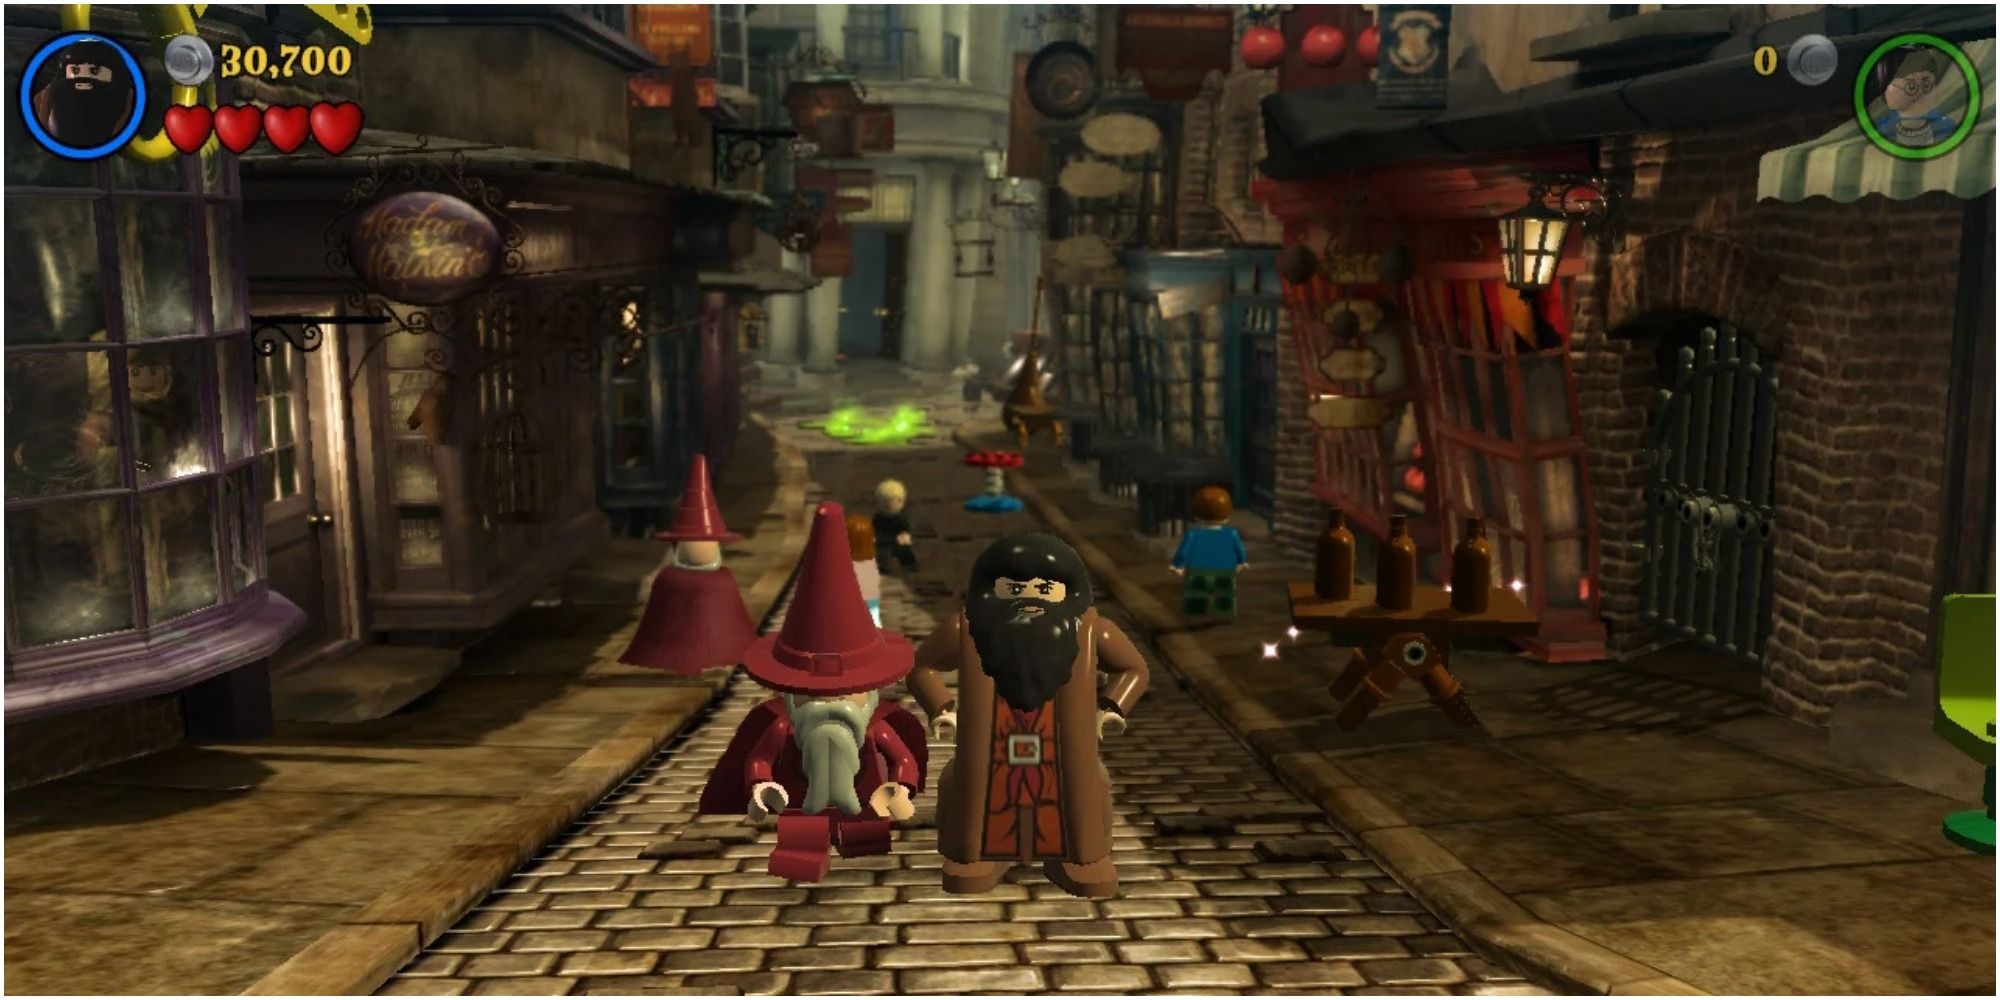 Hagrid and Dumbledore from Lego Harry Potter Collection walking the Diagon Alley